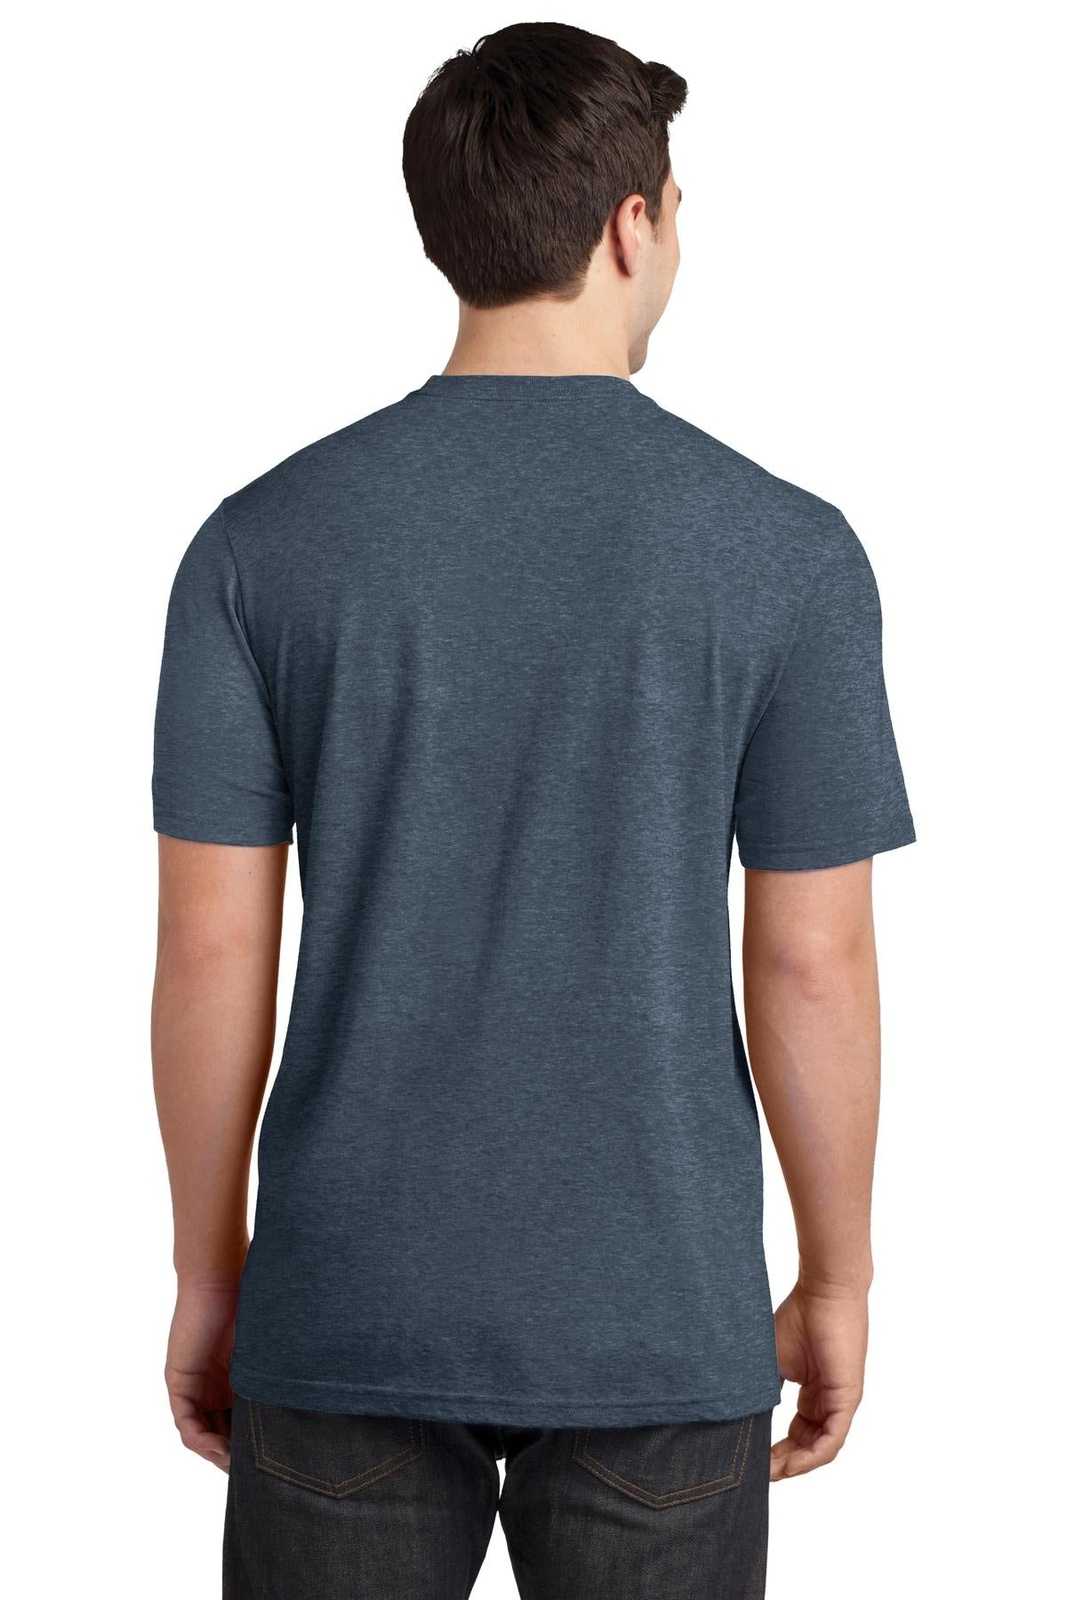 District DT6000P Very Important Tee with Pocket - Heathered Navy - HIT a Double - 1